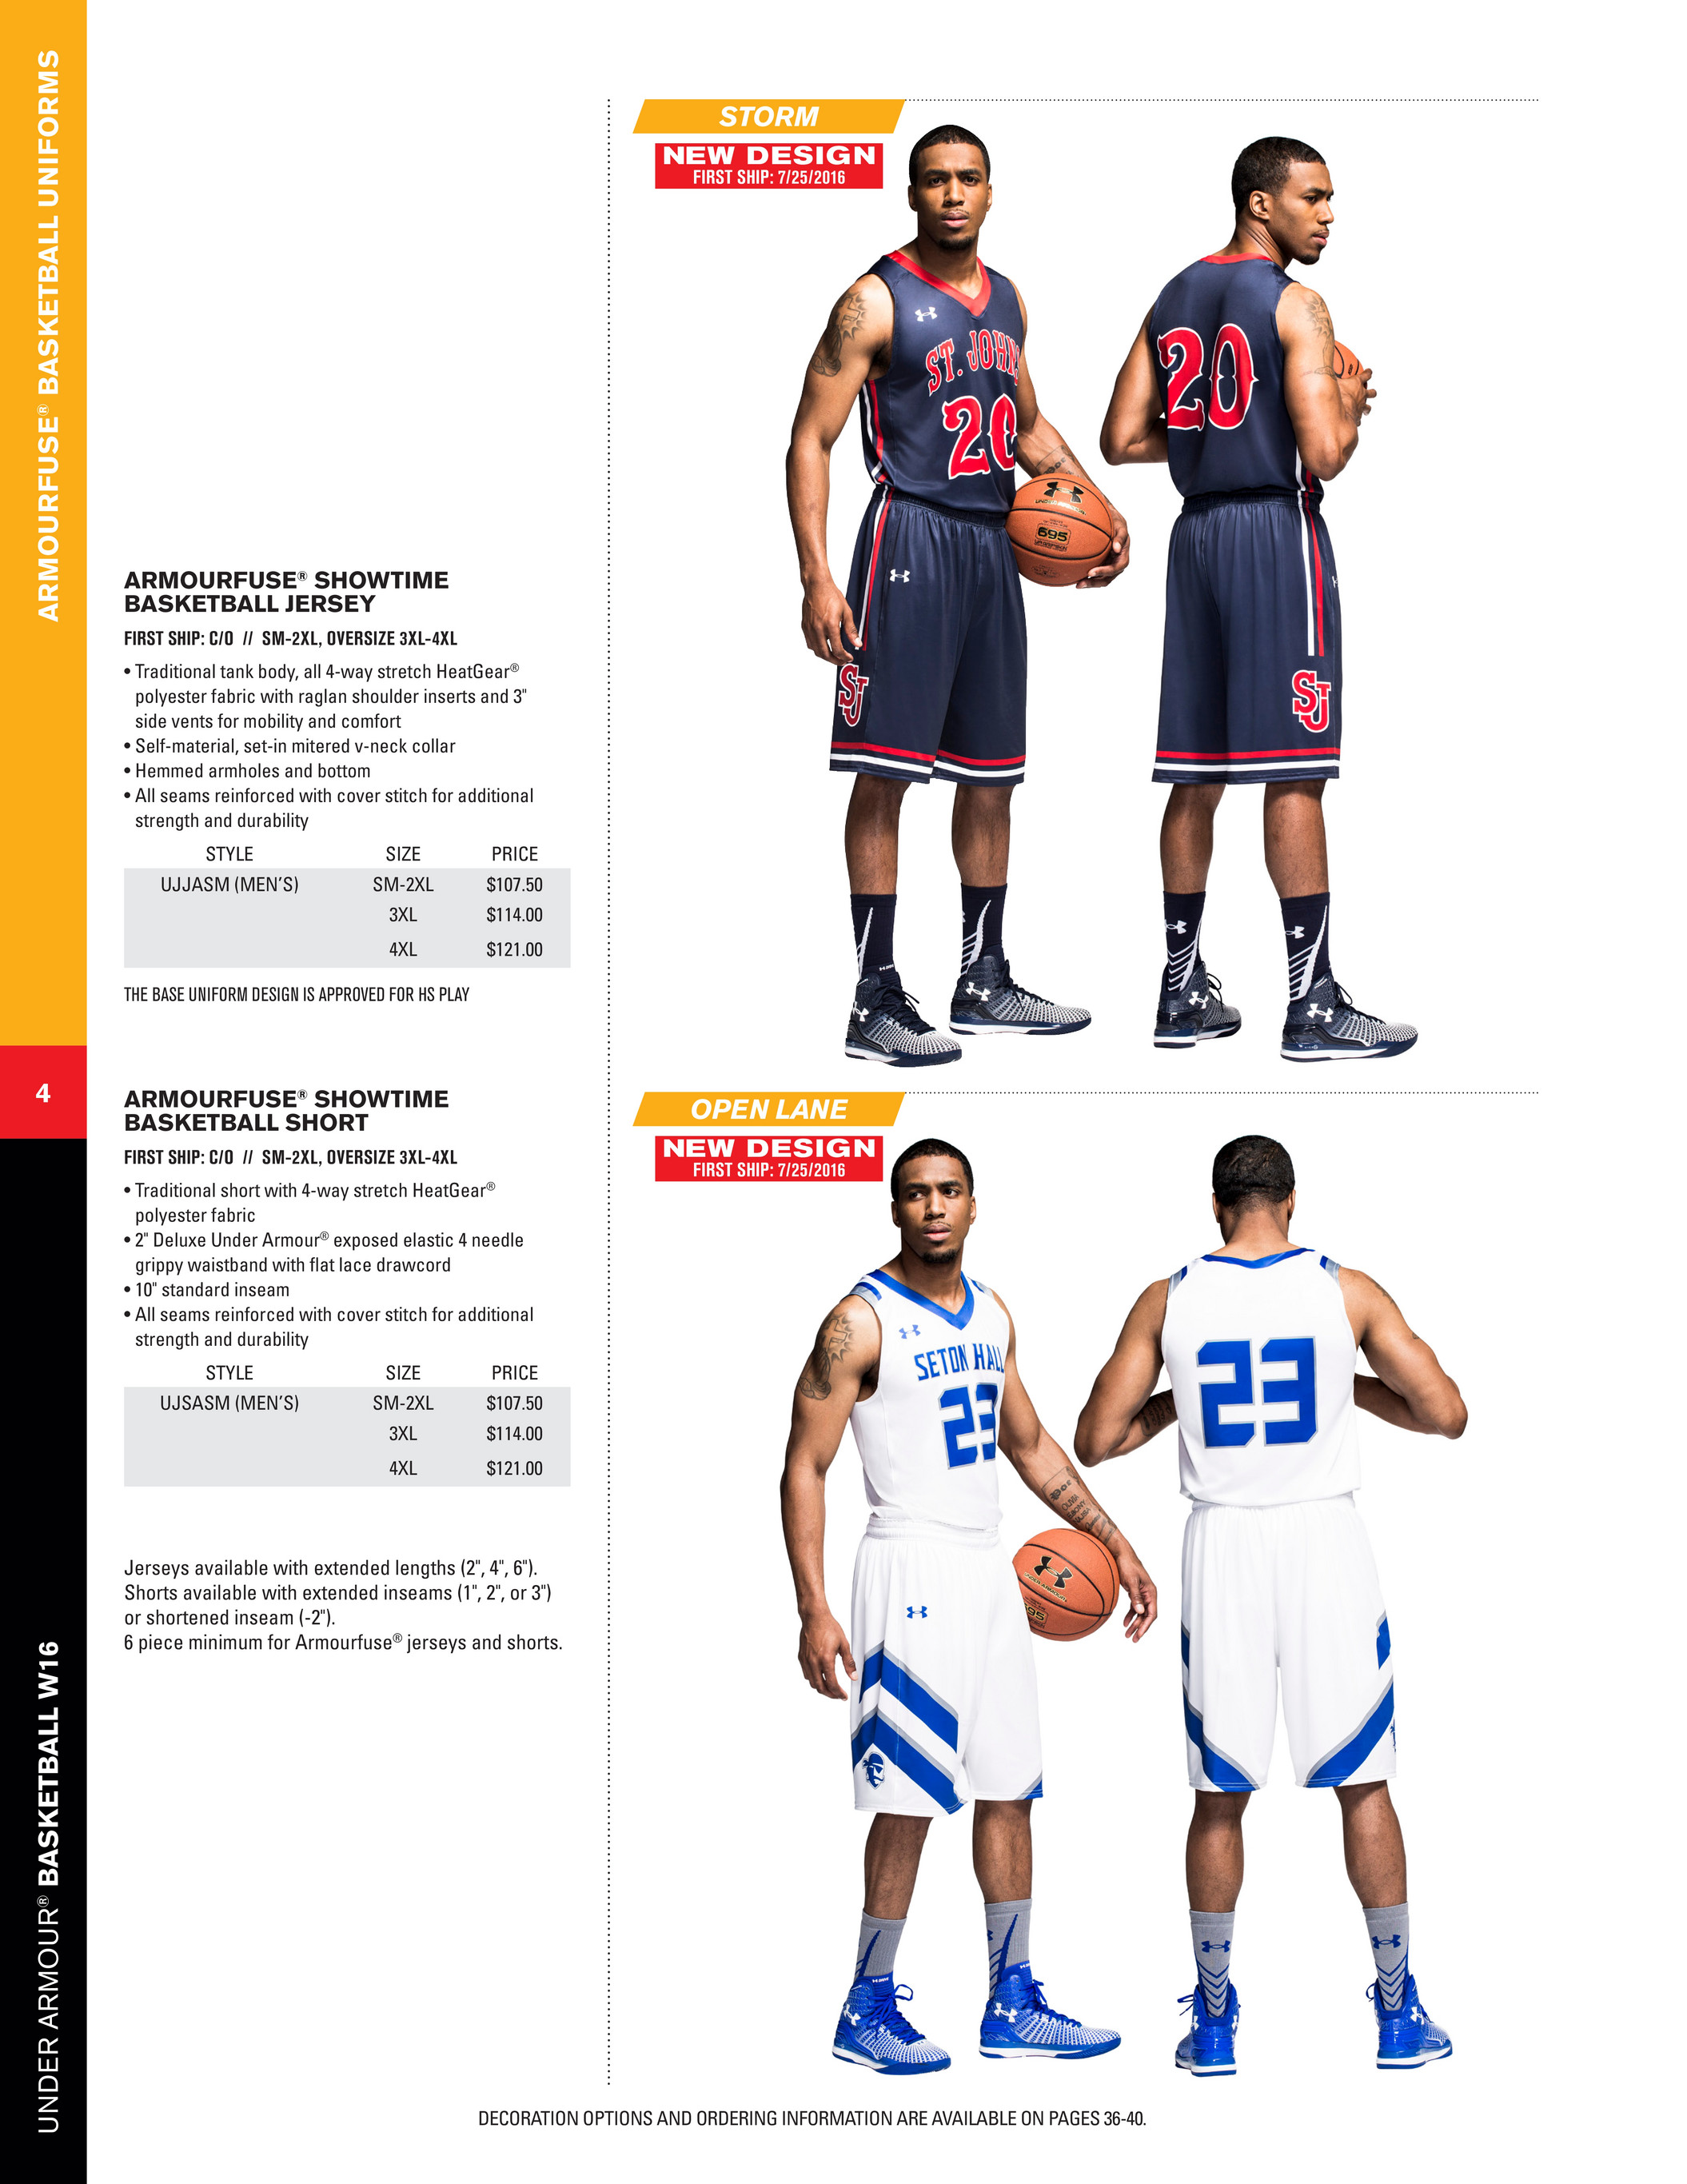 My publications - Under Armour Basketball Catalogue FW 2016 - Page 6-7